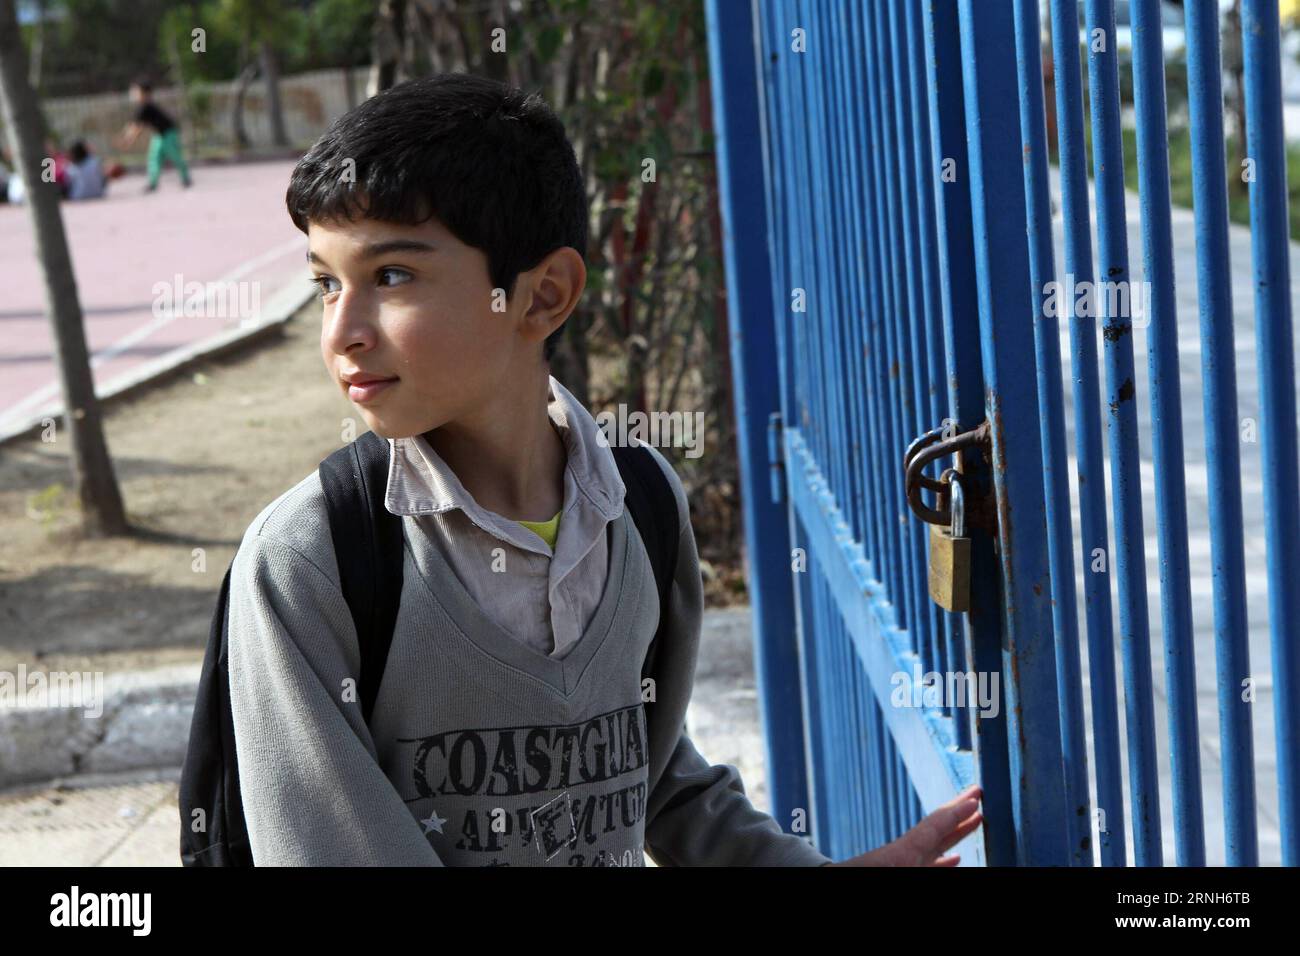 A young boy from Syria waits in the courtyard of the 2nd Tavros Elementary School to enter his classroom, in Athens, Greece on Oct. 19, 2016. Under the new refugee schooling program which was introduced in early October by the Greek Ministry of Education, a total of 10,000 refugee children aged 6 to 15 years old in Greece are expected to attend four-hour lessons every day in 150 schools all over Greece within the next few weeks. ) GREECE-ATHENS-REFUGEE CHILDREN-EDUCATION MariosxLolos PUBLICATIONxNOTxINxCHN   a Young Boy from Syria Waits in The Courtyard of The 2nd Tavros Elementary School to E Stock Photo